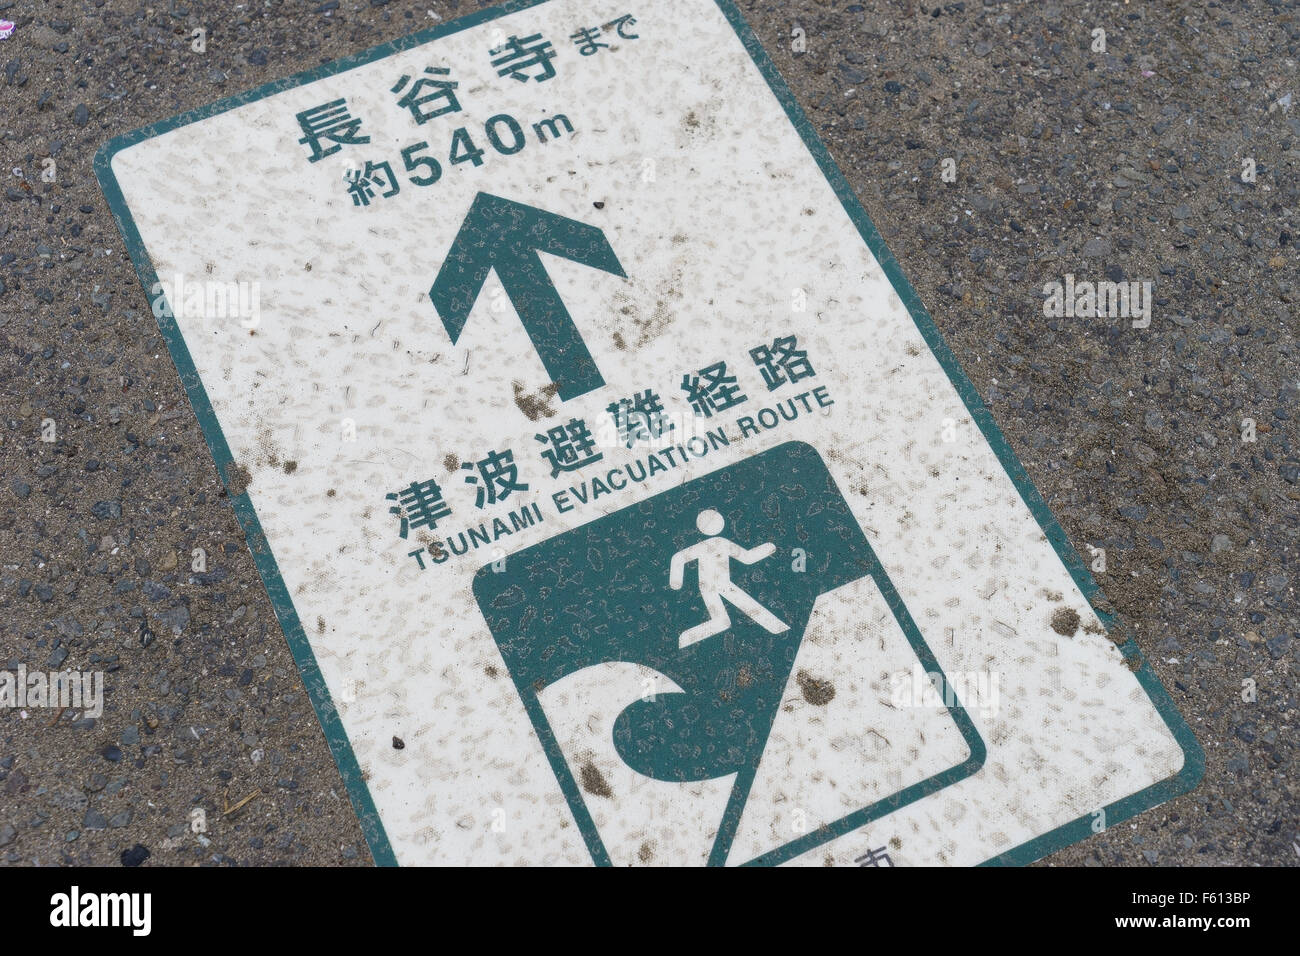 A tsunami evacuation route sign on a pavement in Japan. Stock Photo